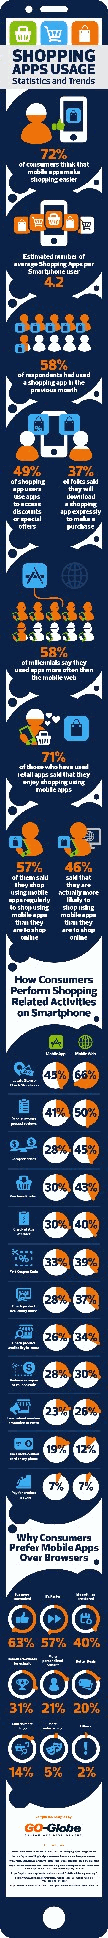 Shopping Apps Usage – Statistics and Trends [Infographic]